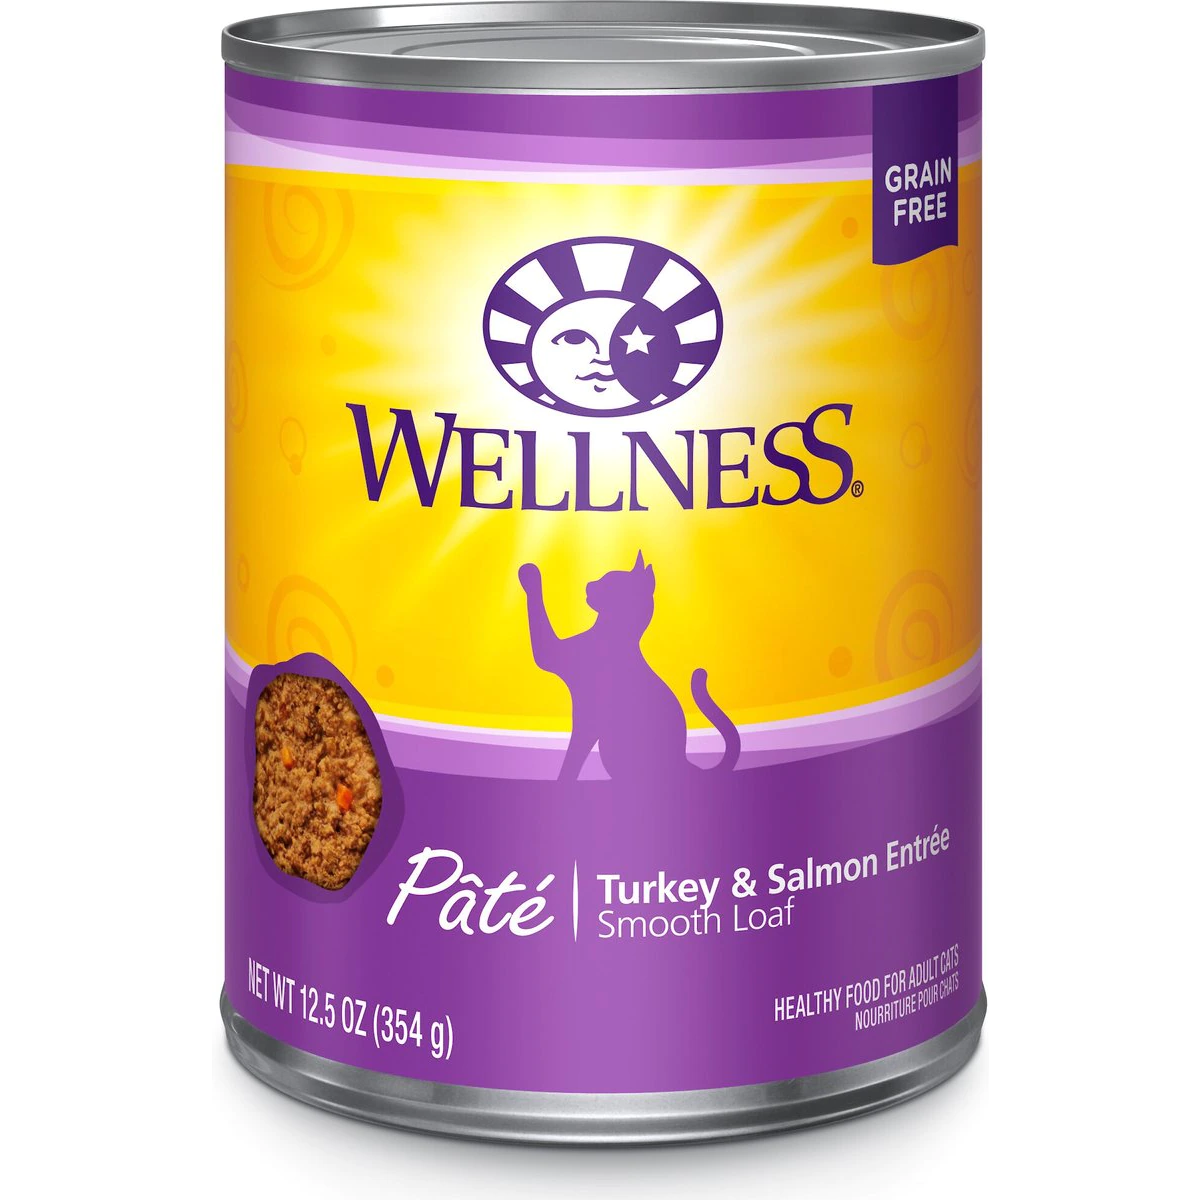 Wellness Complete Health Turkey & Salmon Formula Grain-Free Canned Cat Food 354g Canned Cat Food 354g | PetMax Canada